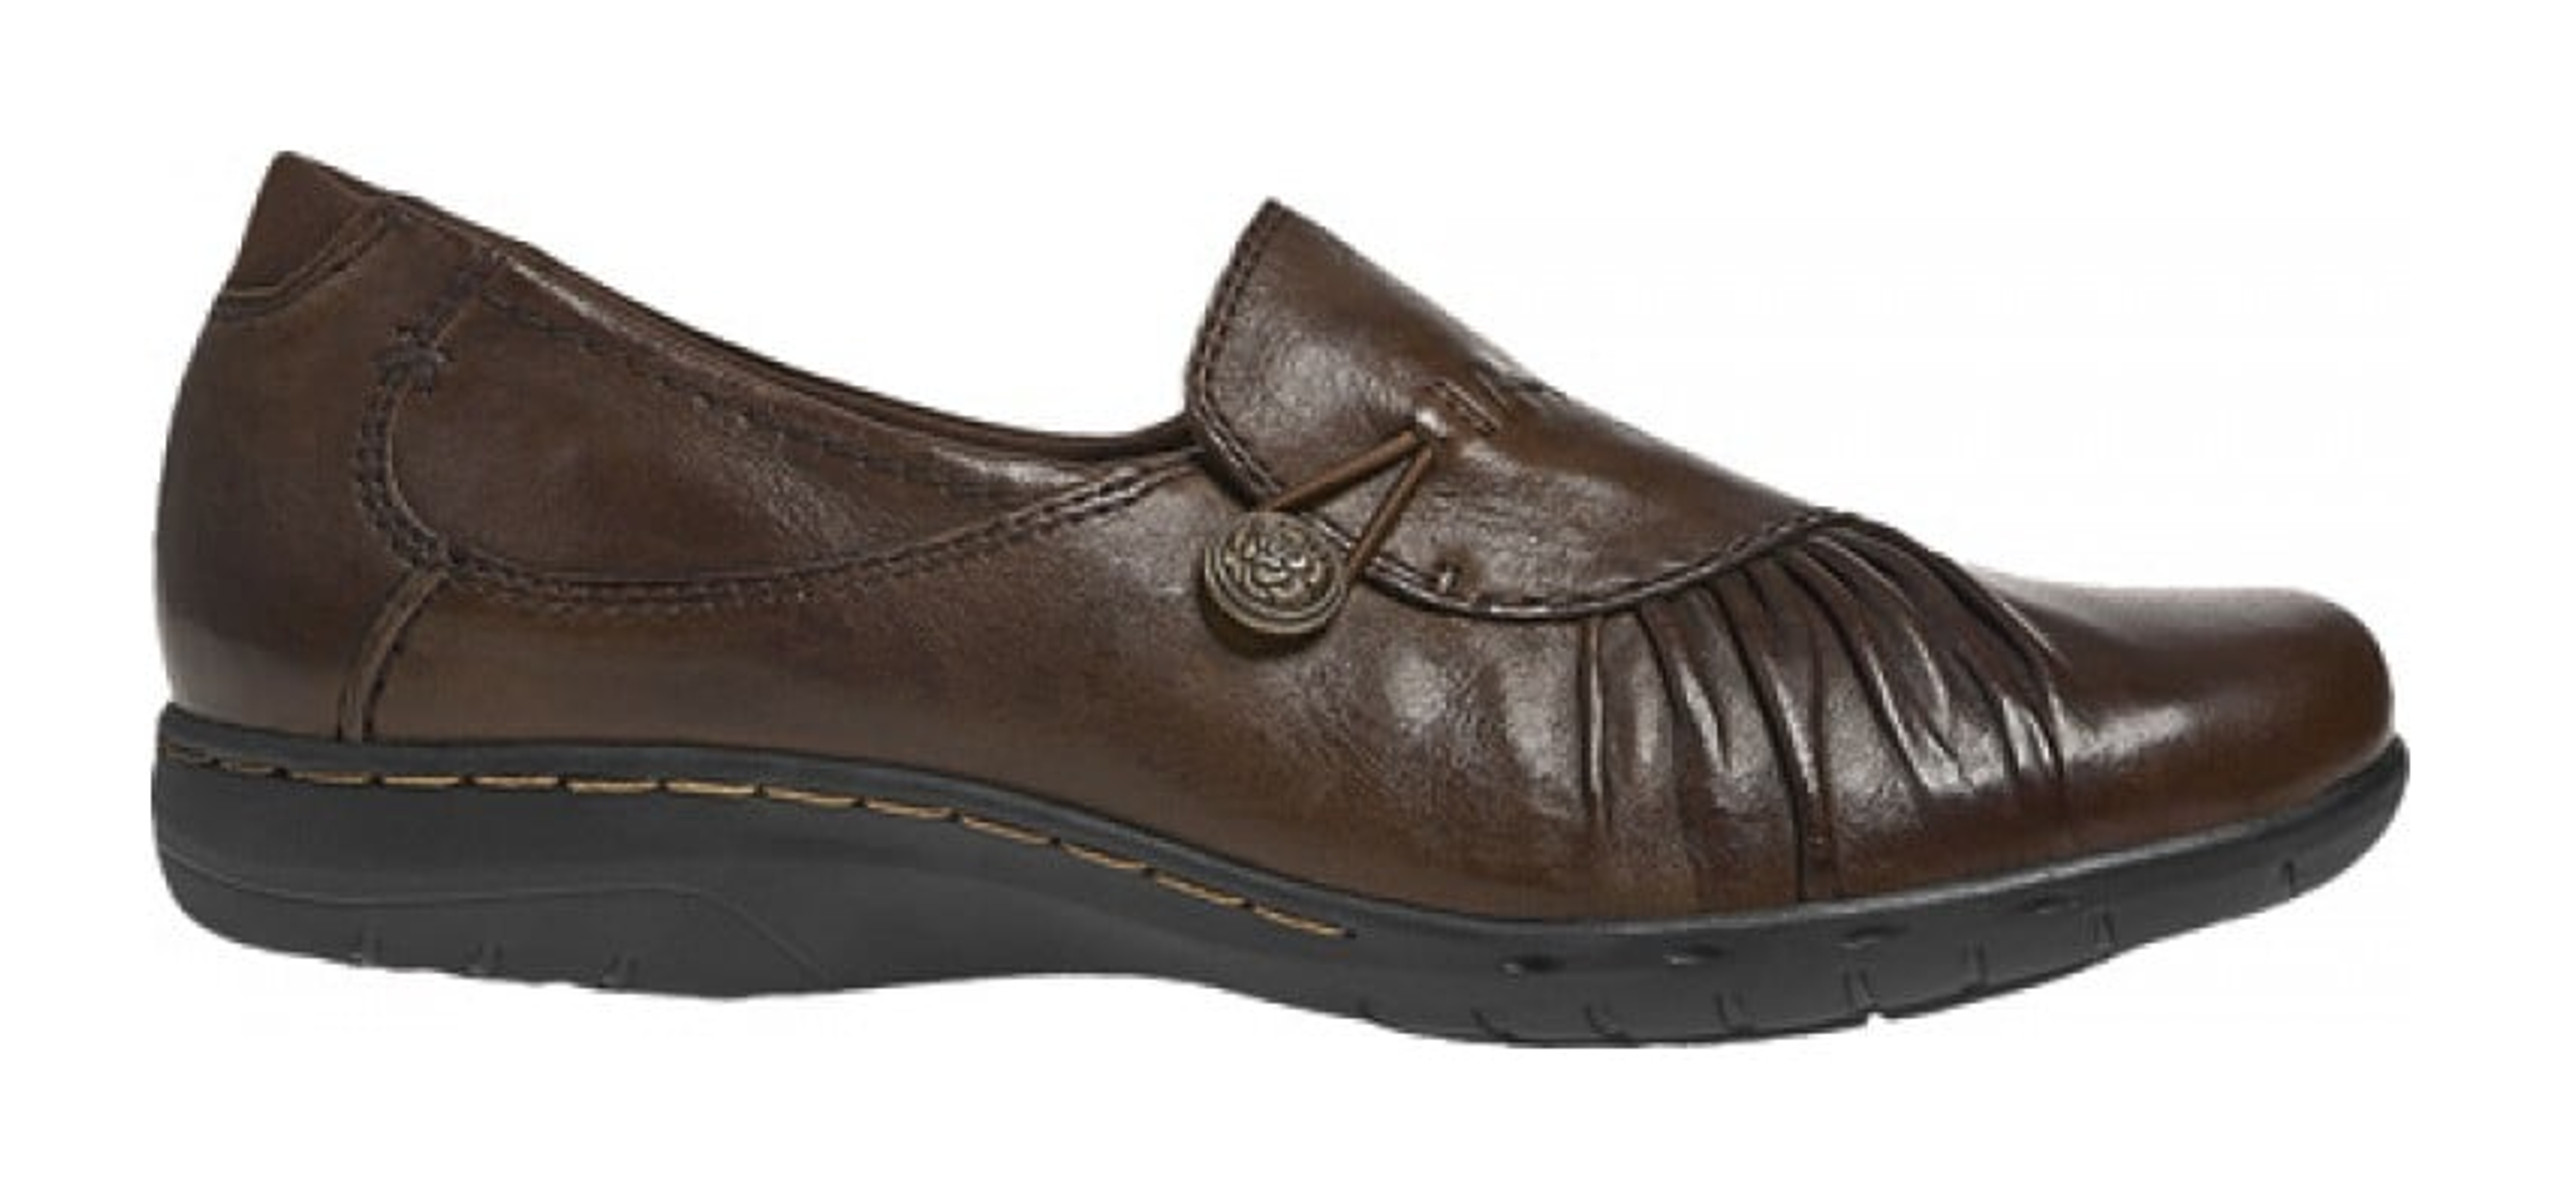 Cobb Hill by Rockport - Paulette - Free Shipping